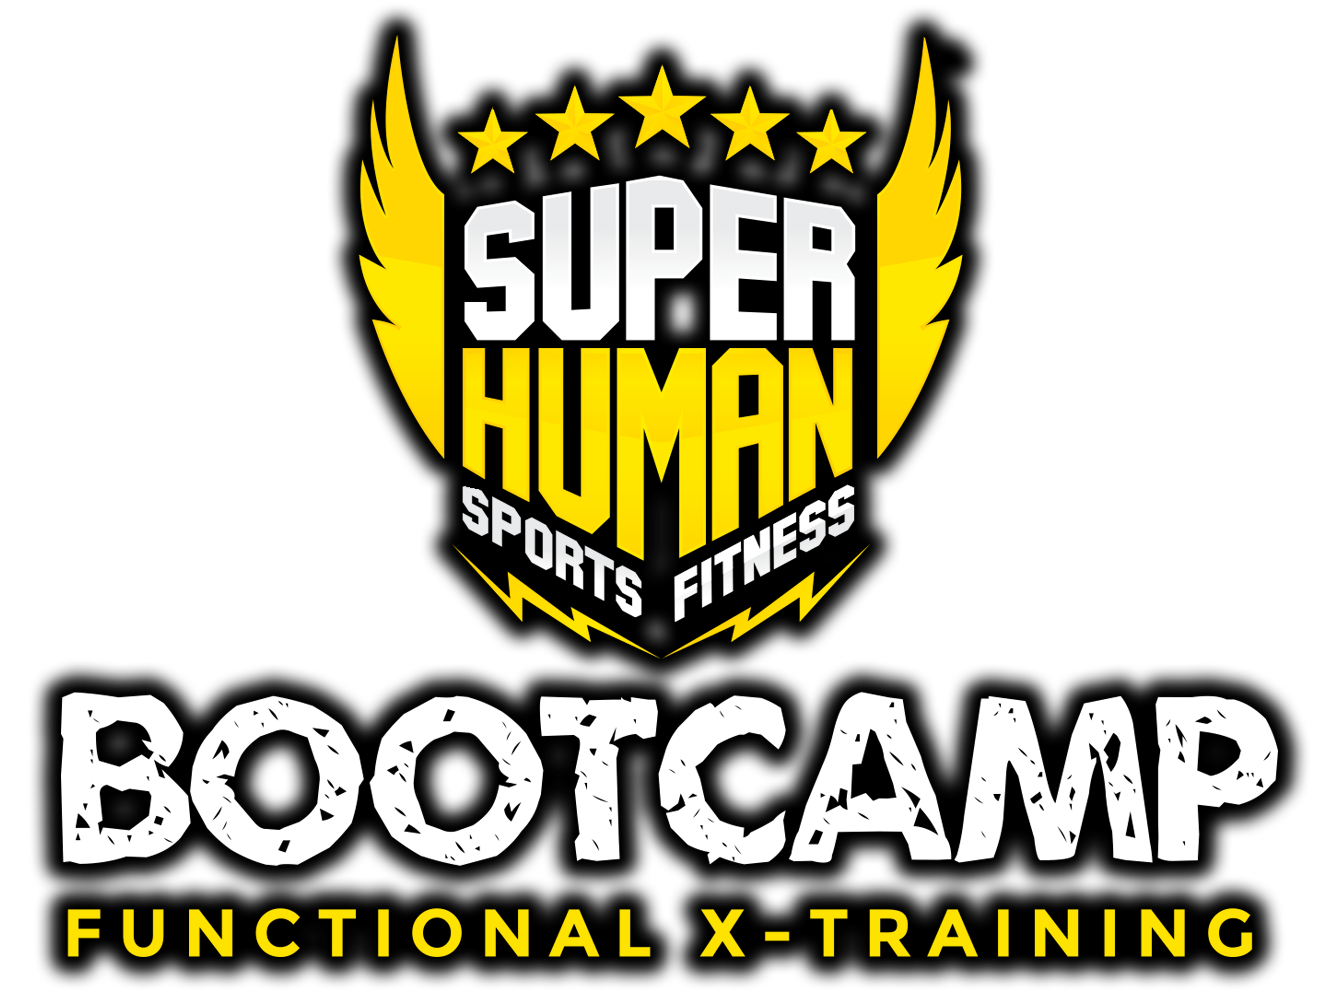 Bootcamp - FXT